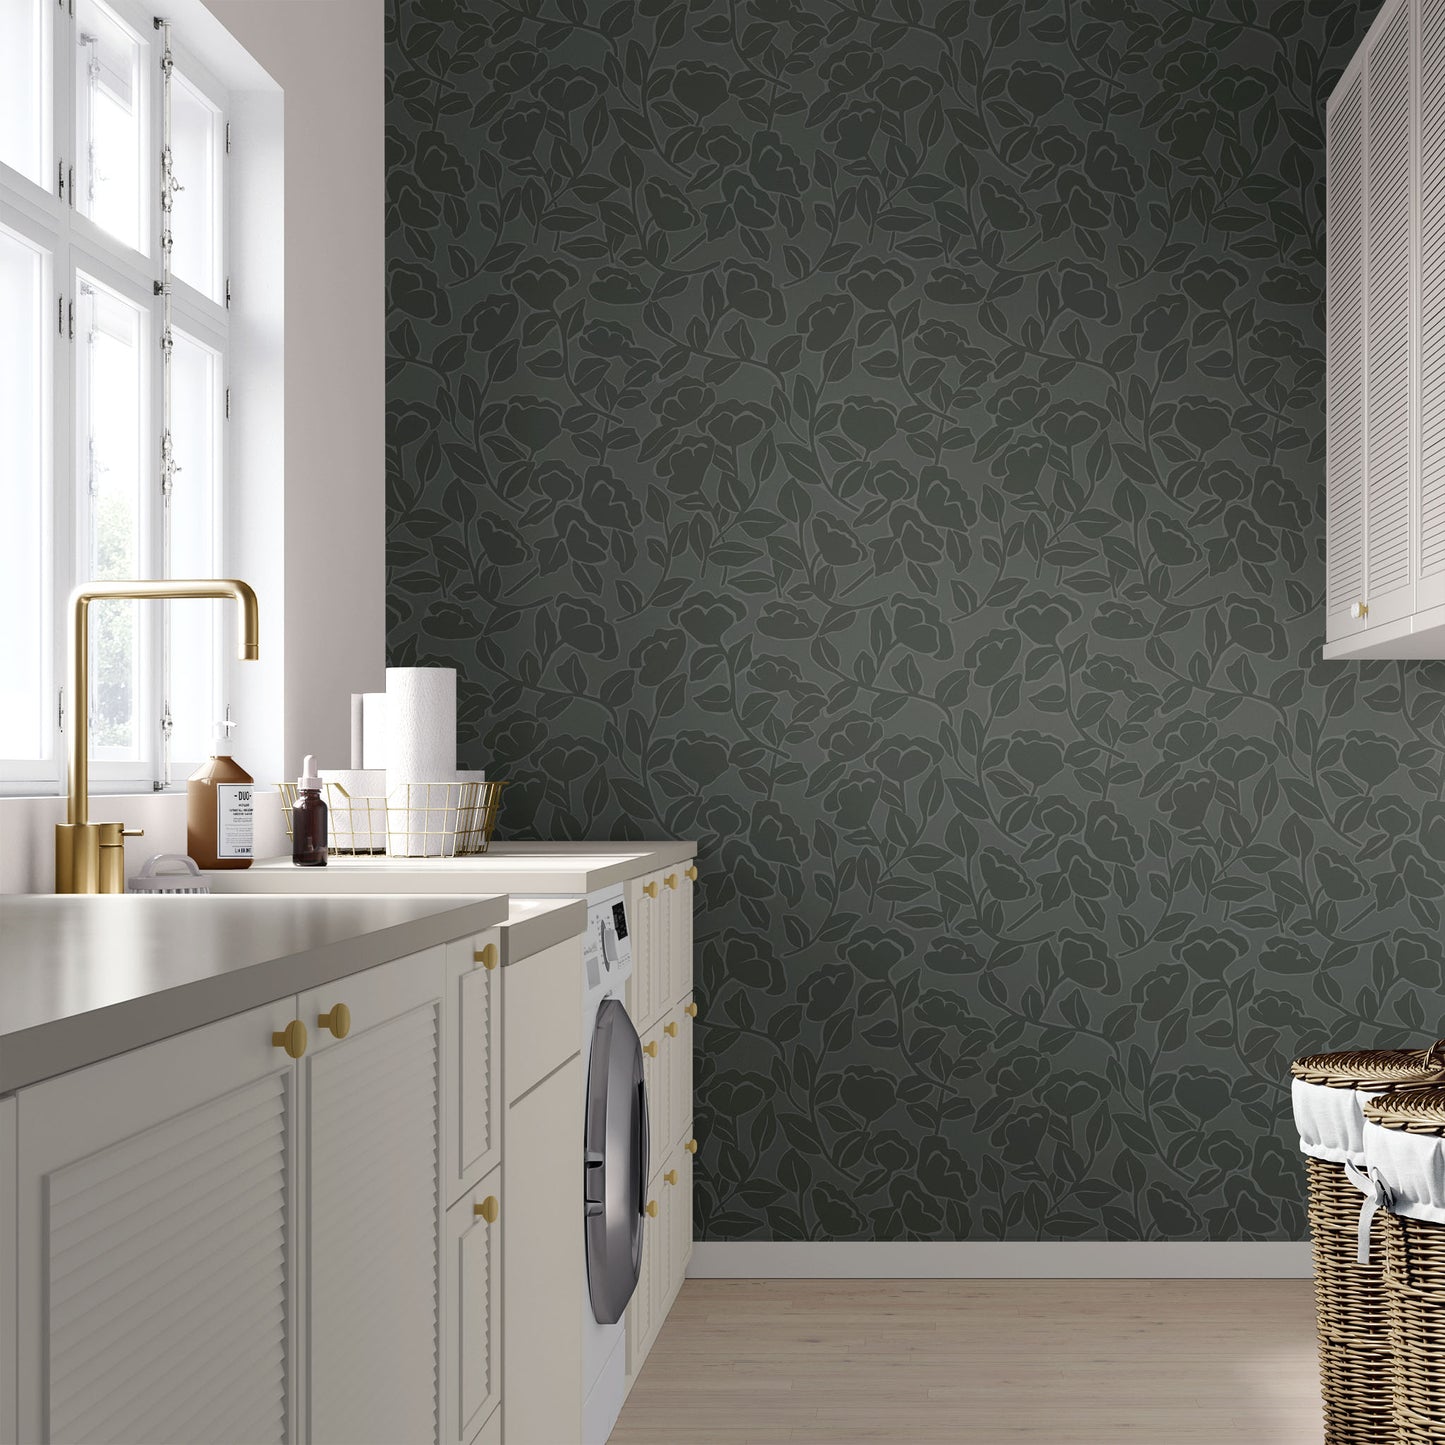 Brookline wallpaper with vines and big florals shown in full size image.